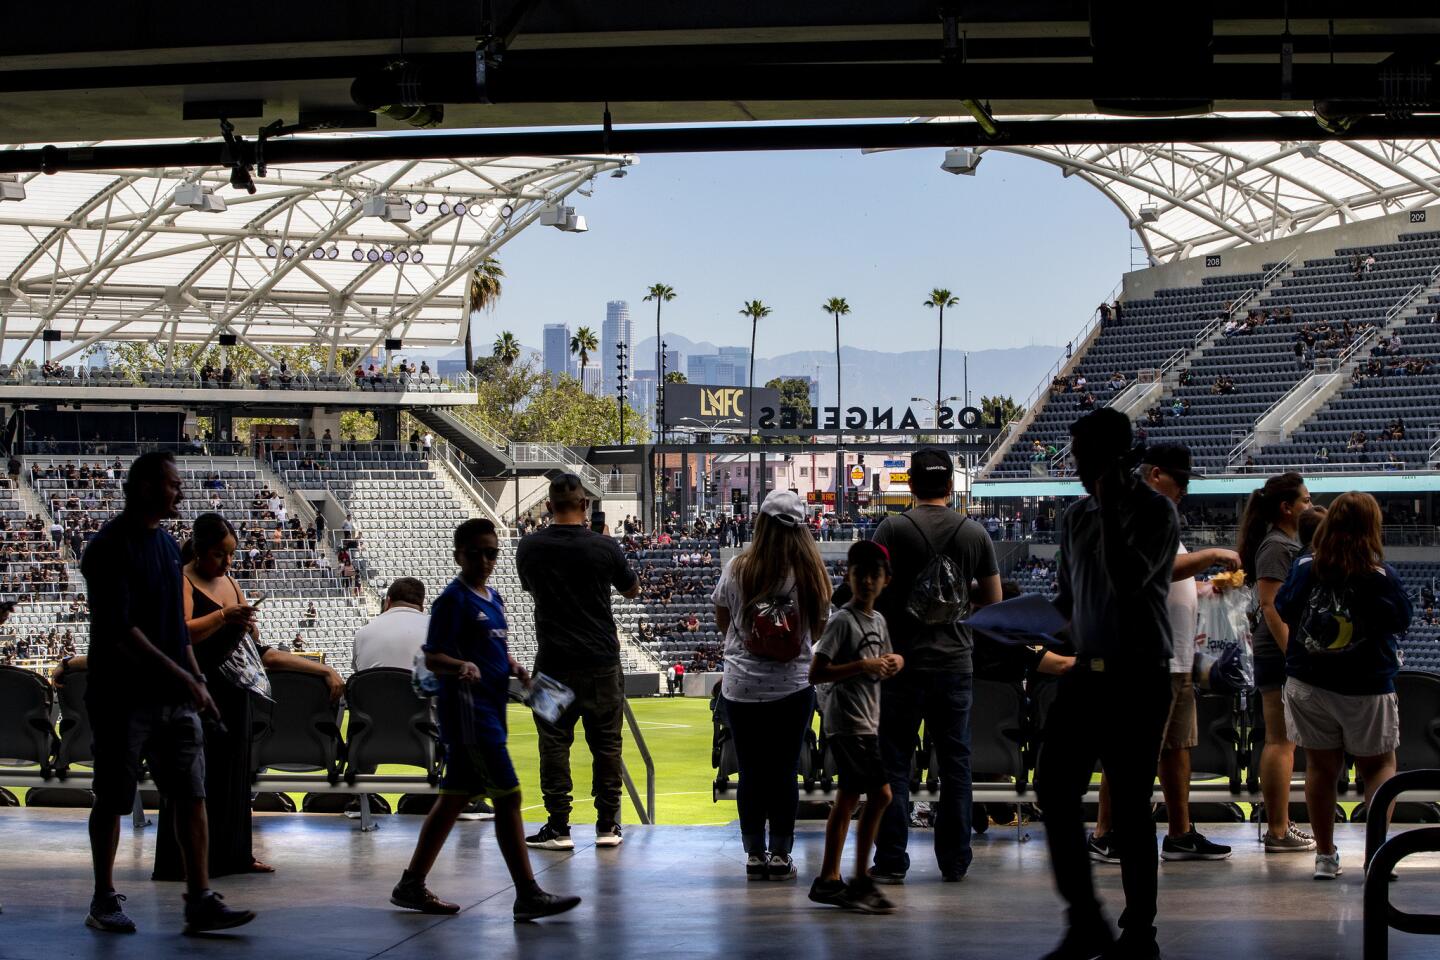 With a view of the Los Angeles skyline in the background, hundreds of soccer fans check out the new Banc of California Stadium on April 21.